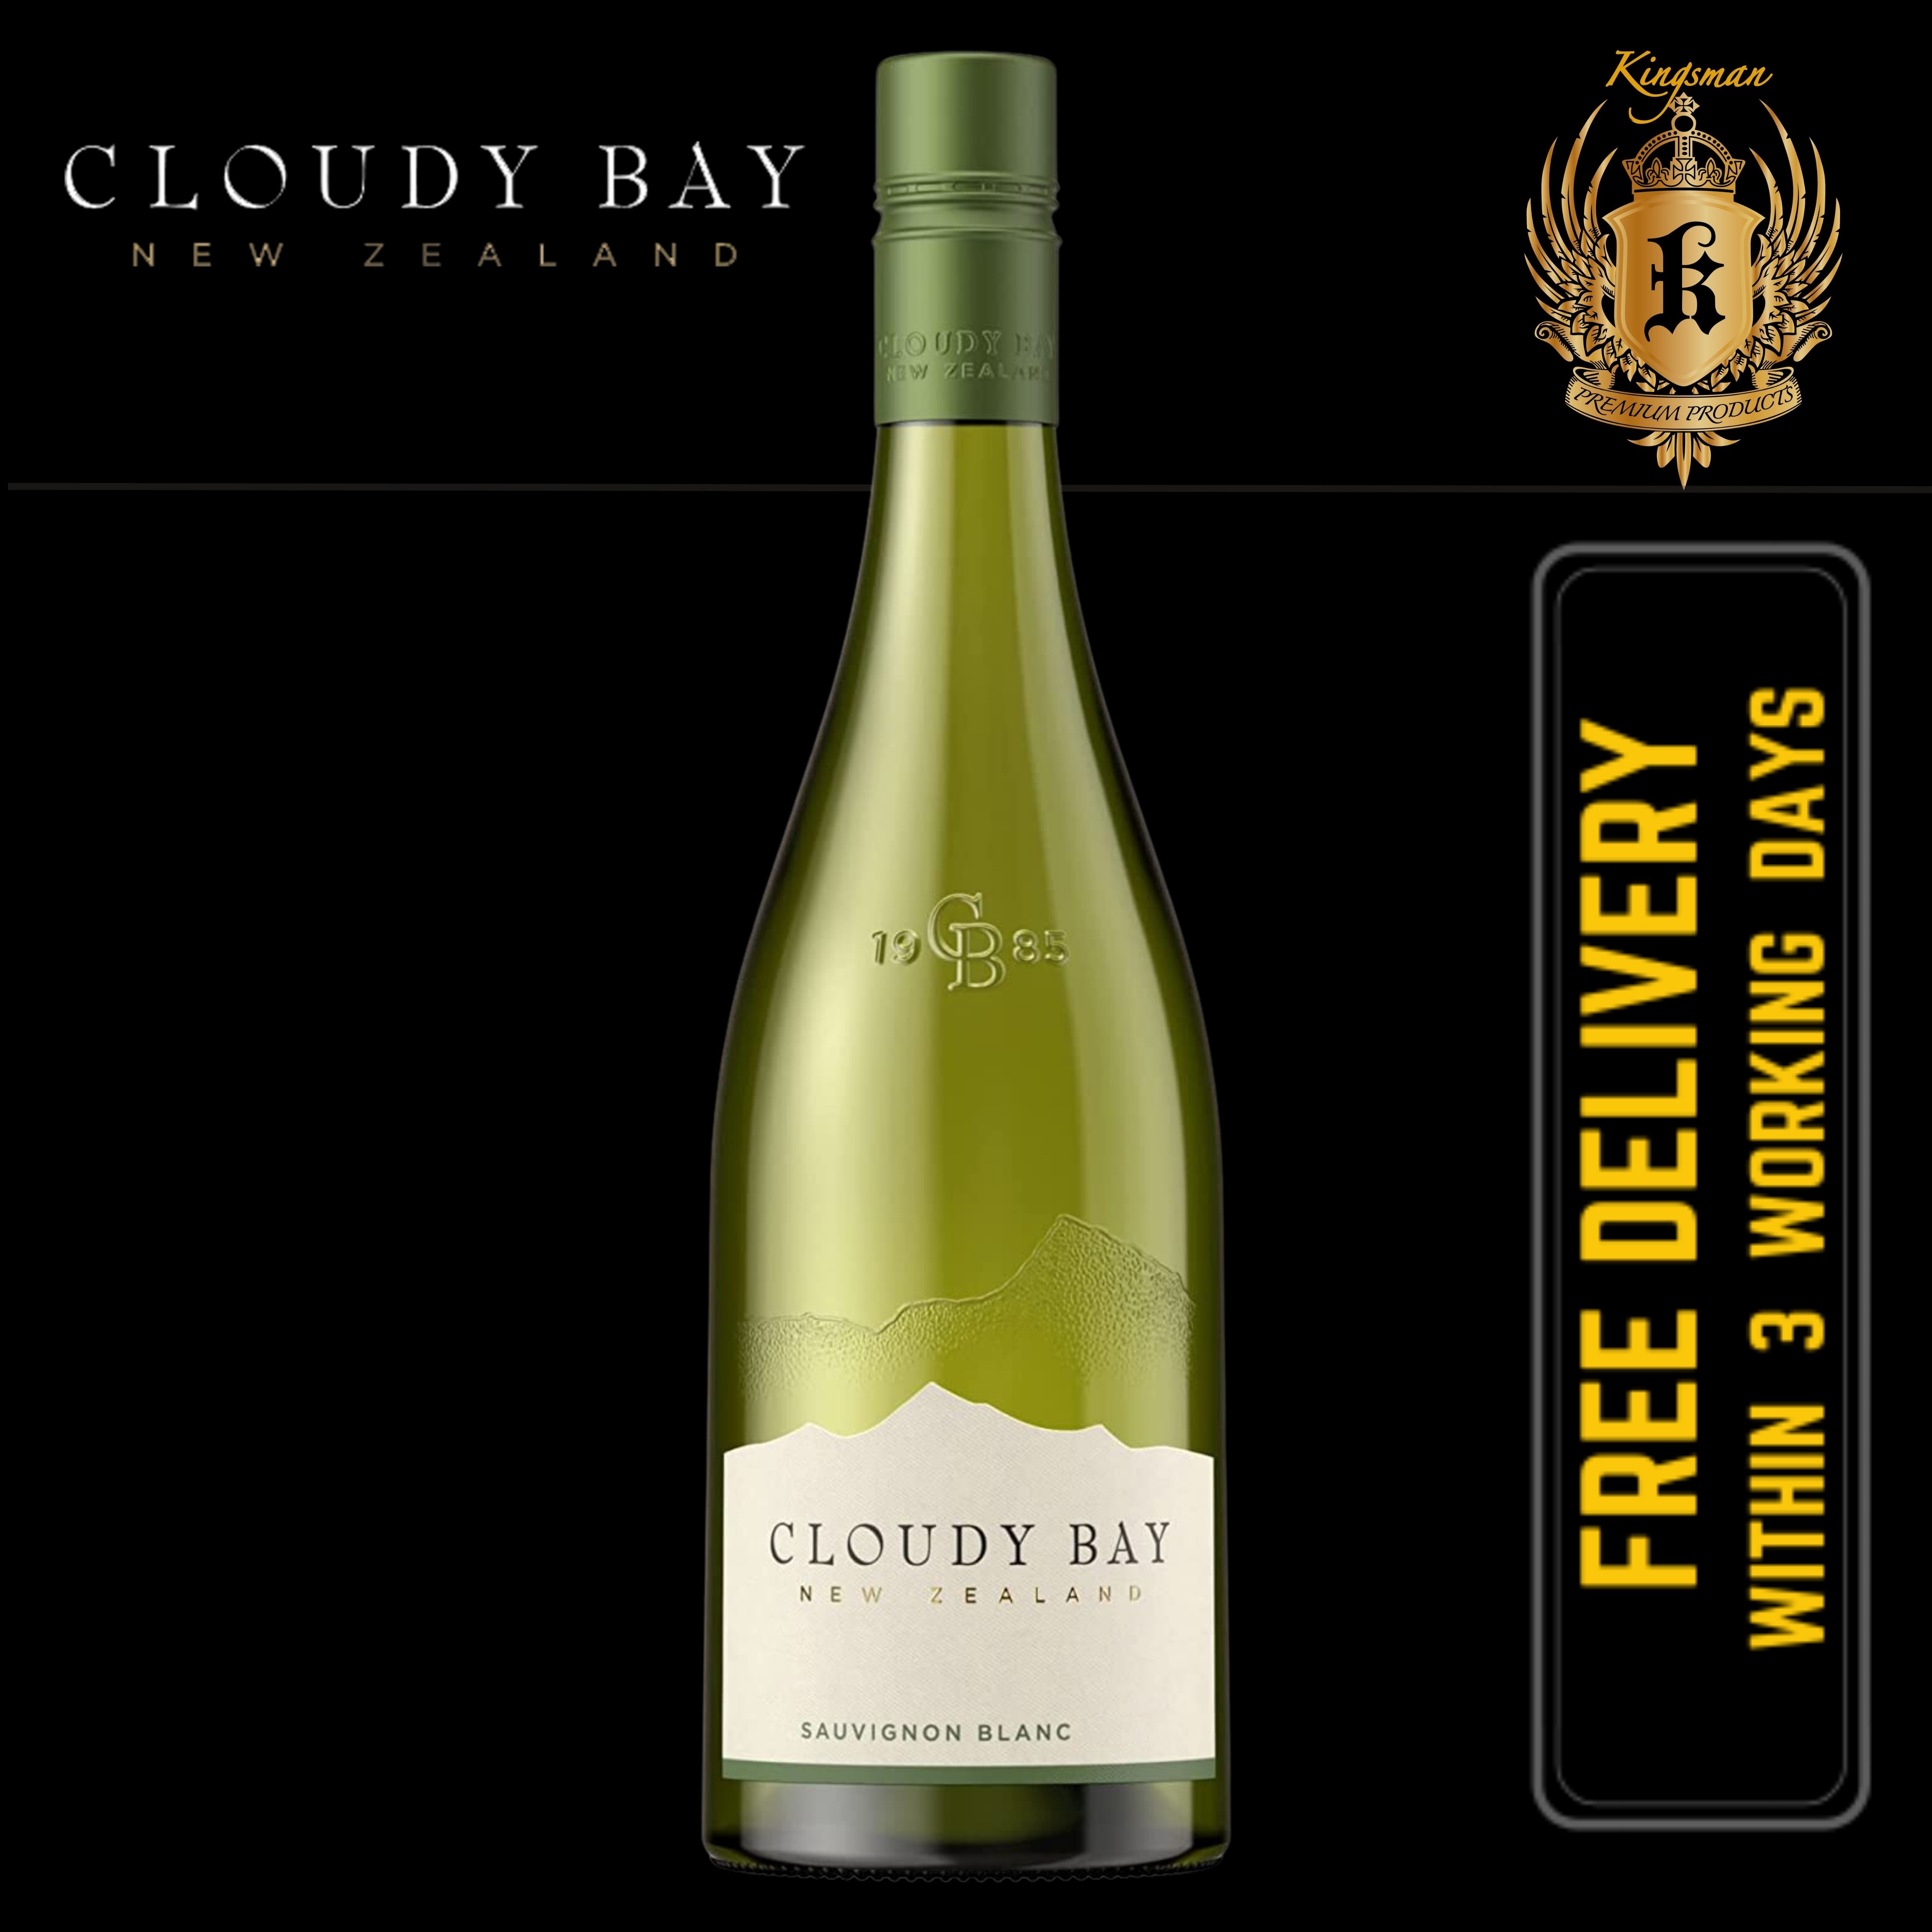 Cloudy Bay Pinot Noir Red & LSA Red Glasses Gift